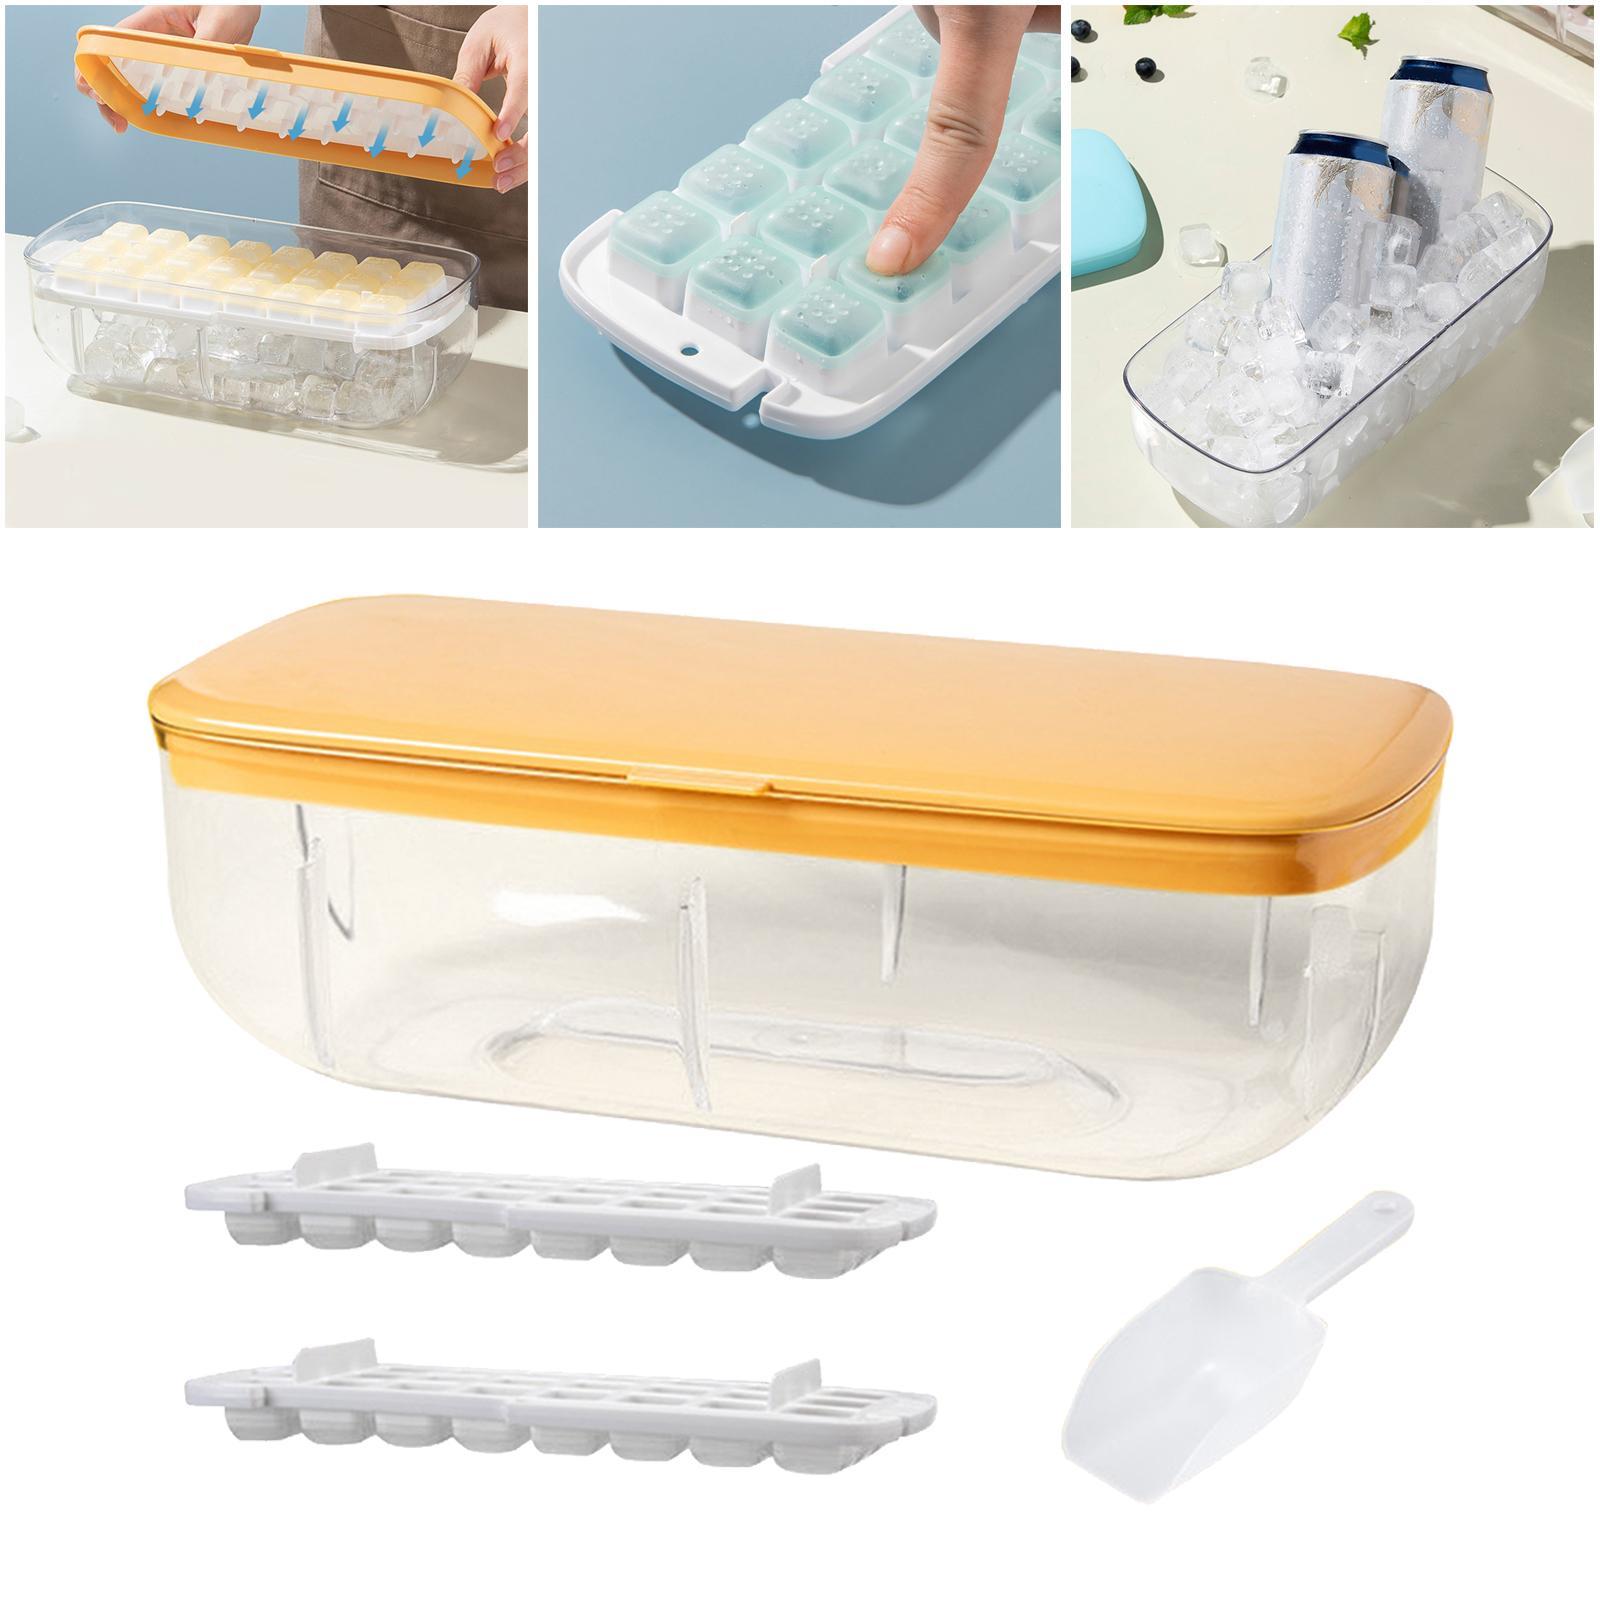 Kitchen 24 Lattice Ice Cube Tray Ice Maker for Freezer Release Mold Quickly